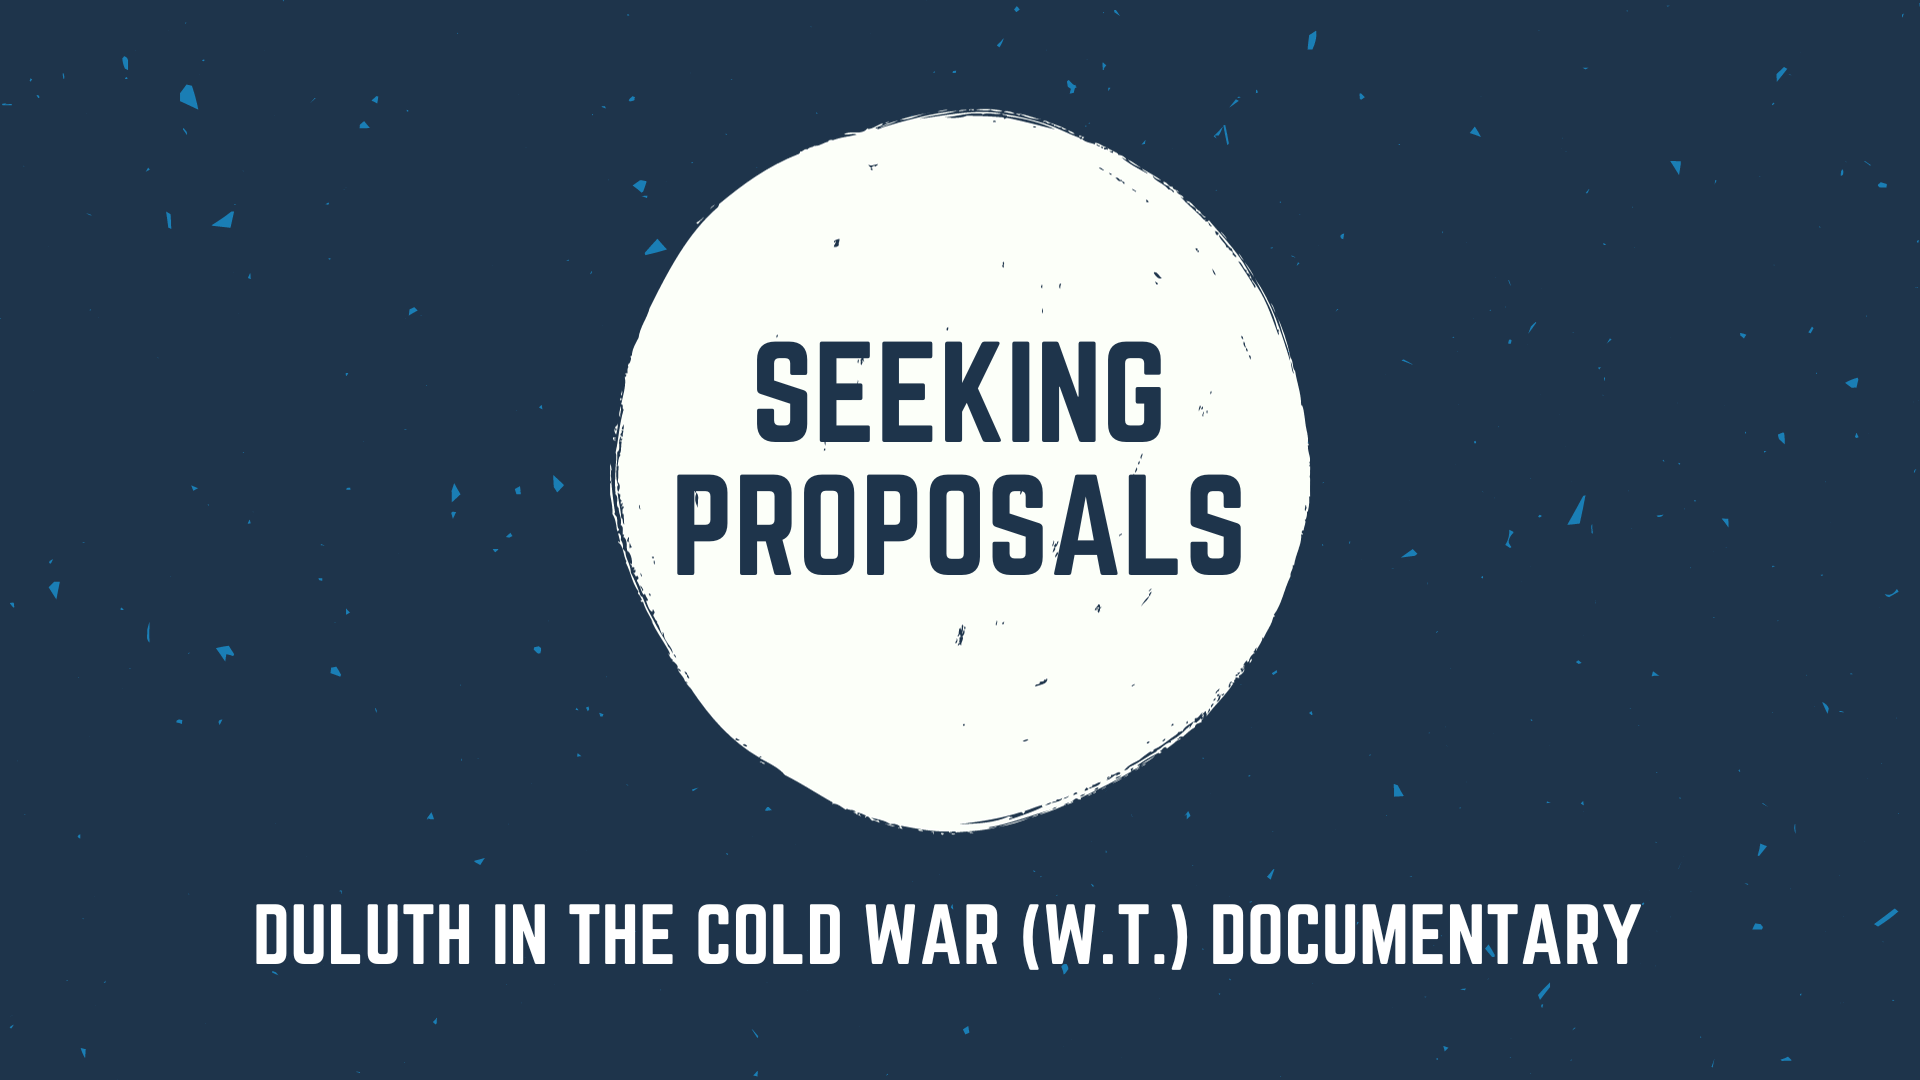 Seeking Proposals for Cold War documentary